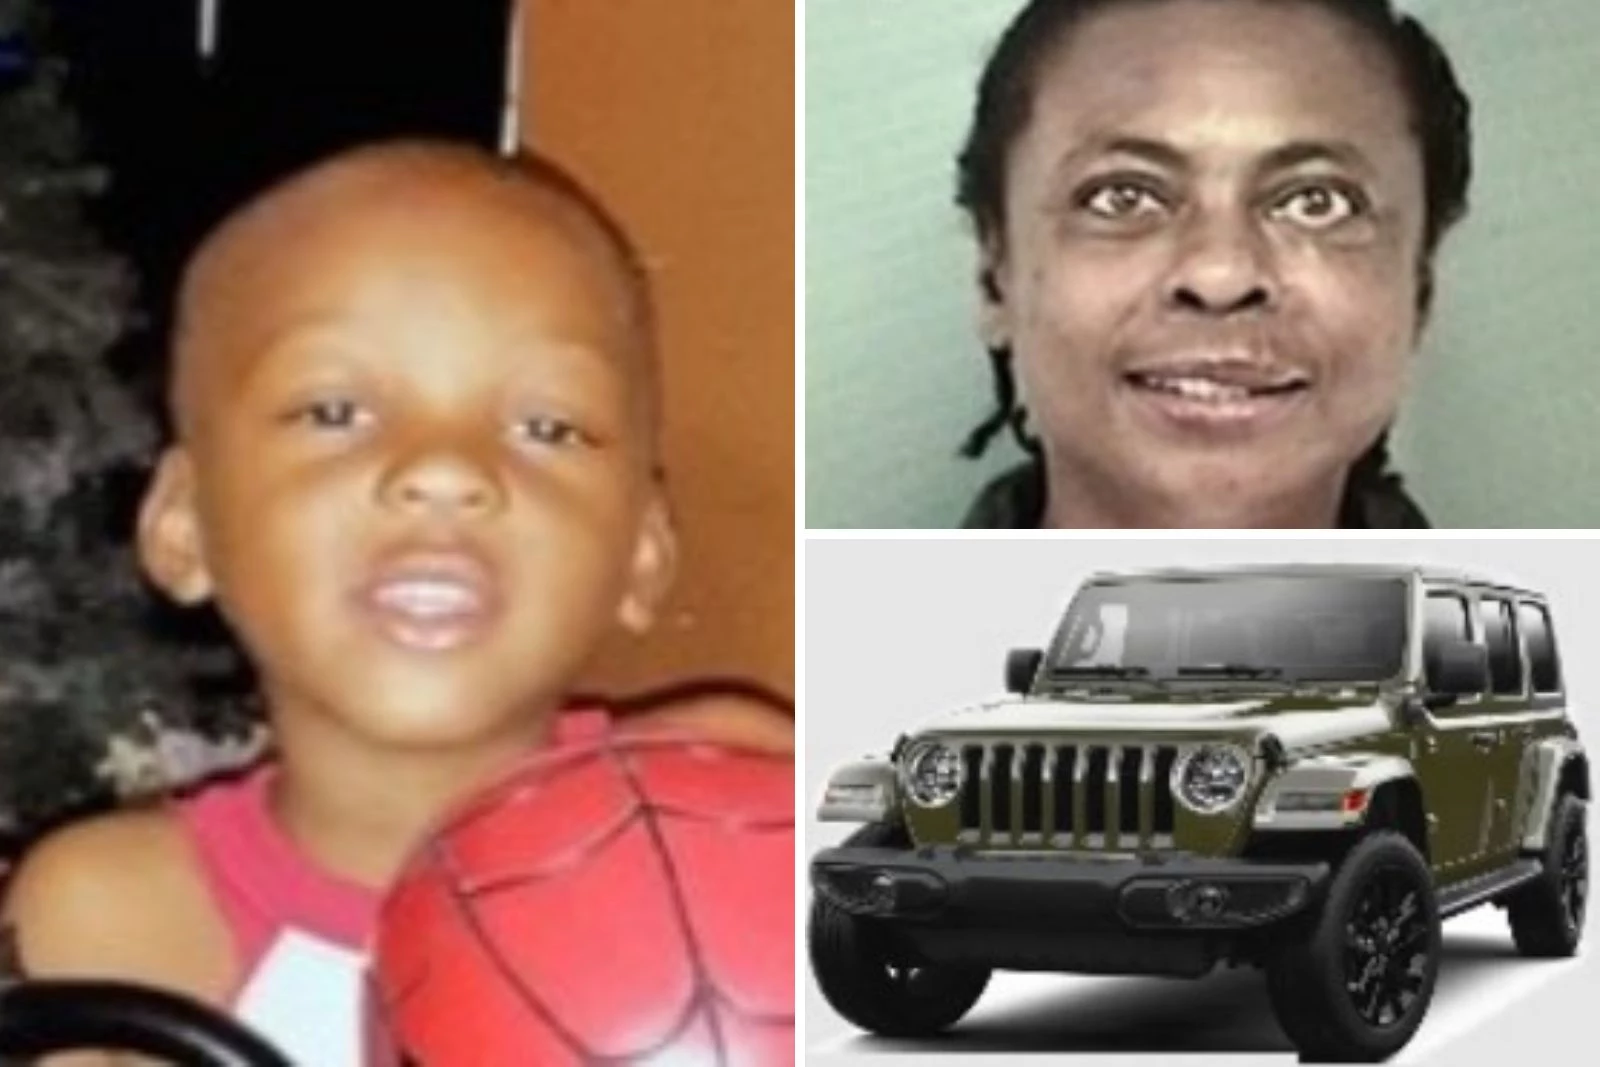 Amber Alert Issued for Abducted East Texas Boy